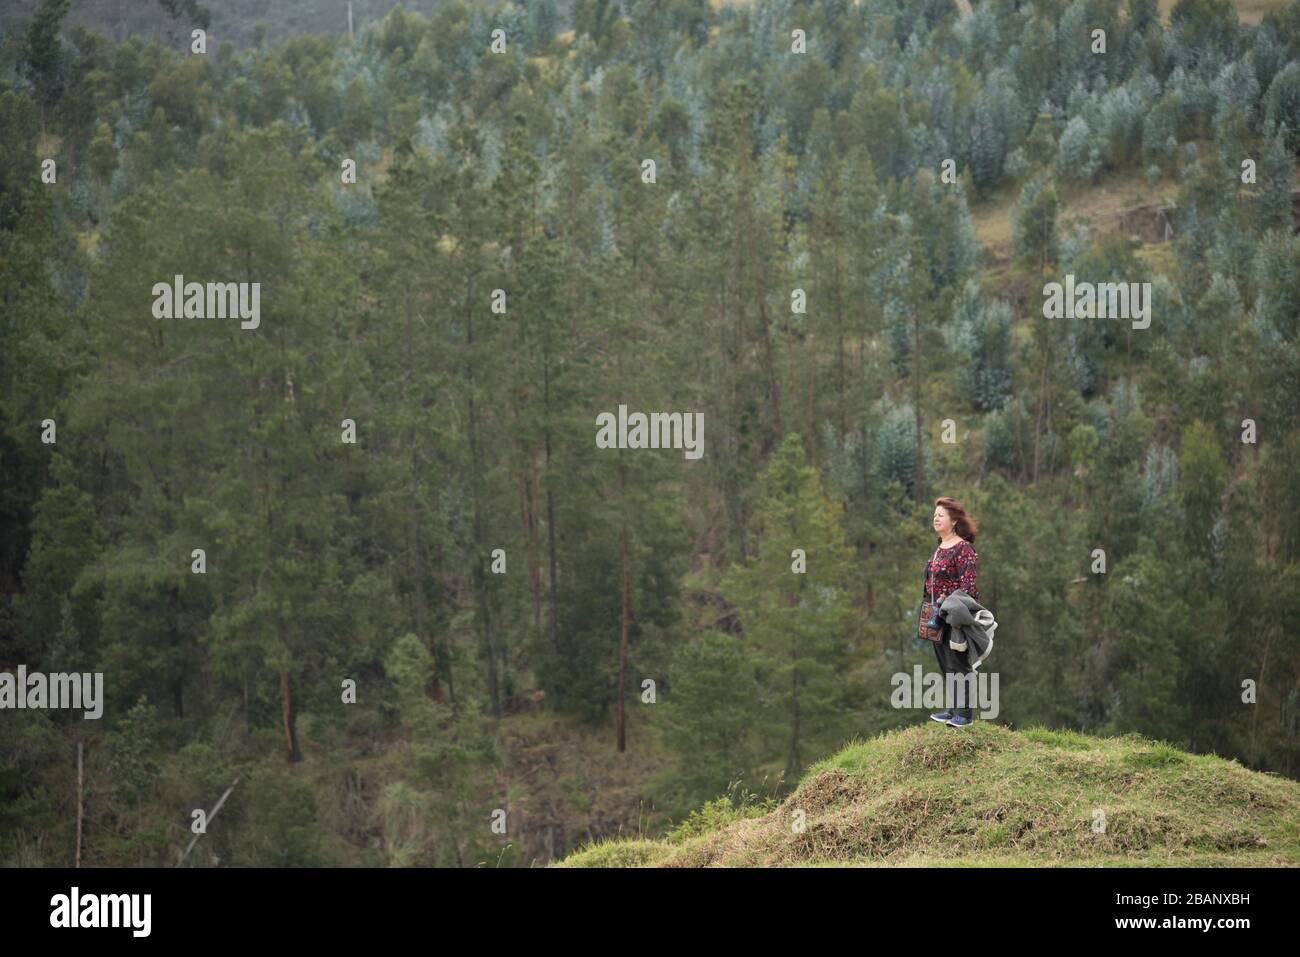 Nemocon, Cundinamarca / Colombia; March 24, 2018: female traveler on top of a hill admiring the scenery. In the background a coniferous forest. Stock Photo